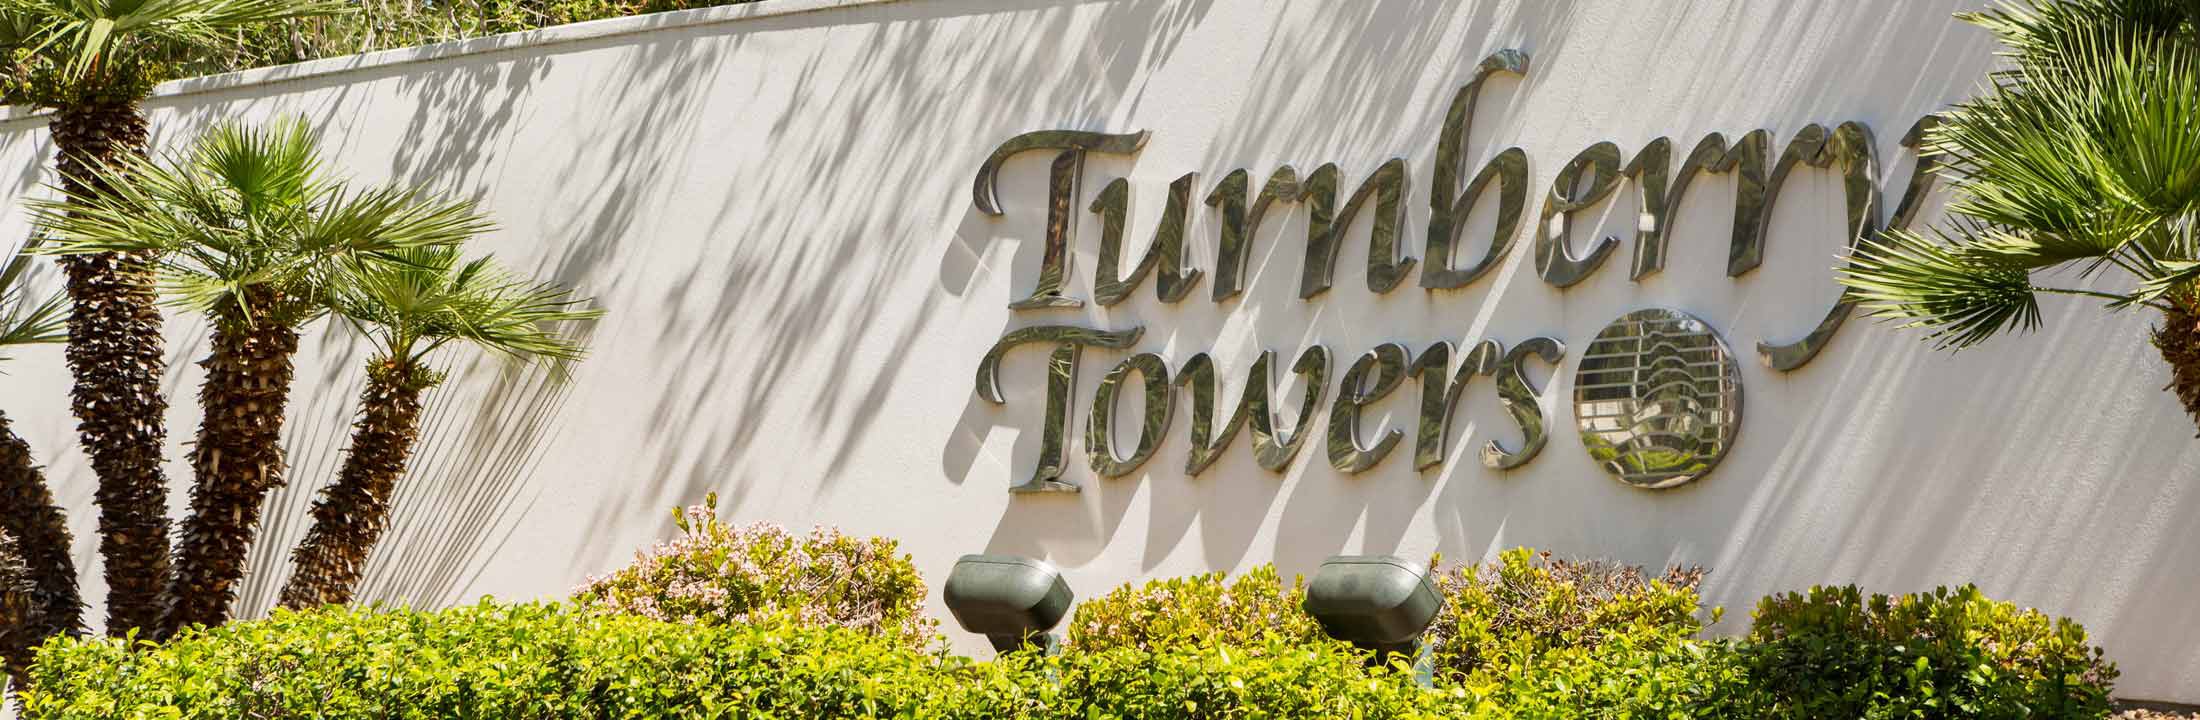 Turnberry Towers Condos For Sale Las Vegas